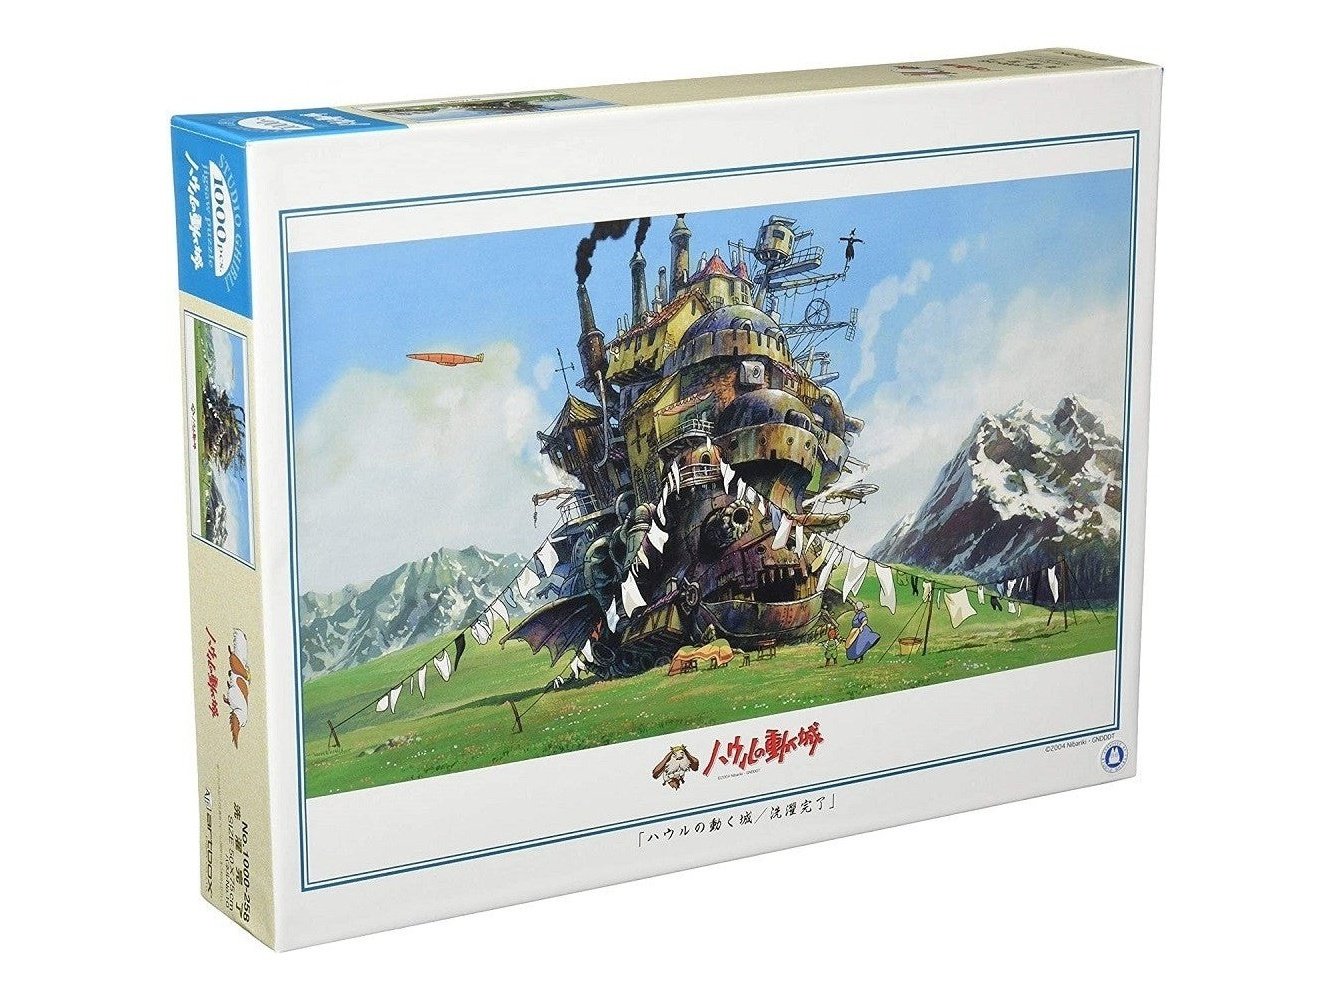 Ensky Howl's Moving Castle The Laundry is Done Jigsaw Puzzle 1000 Pieces 50 x 75cm